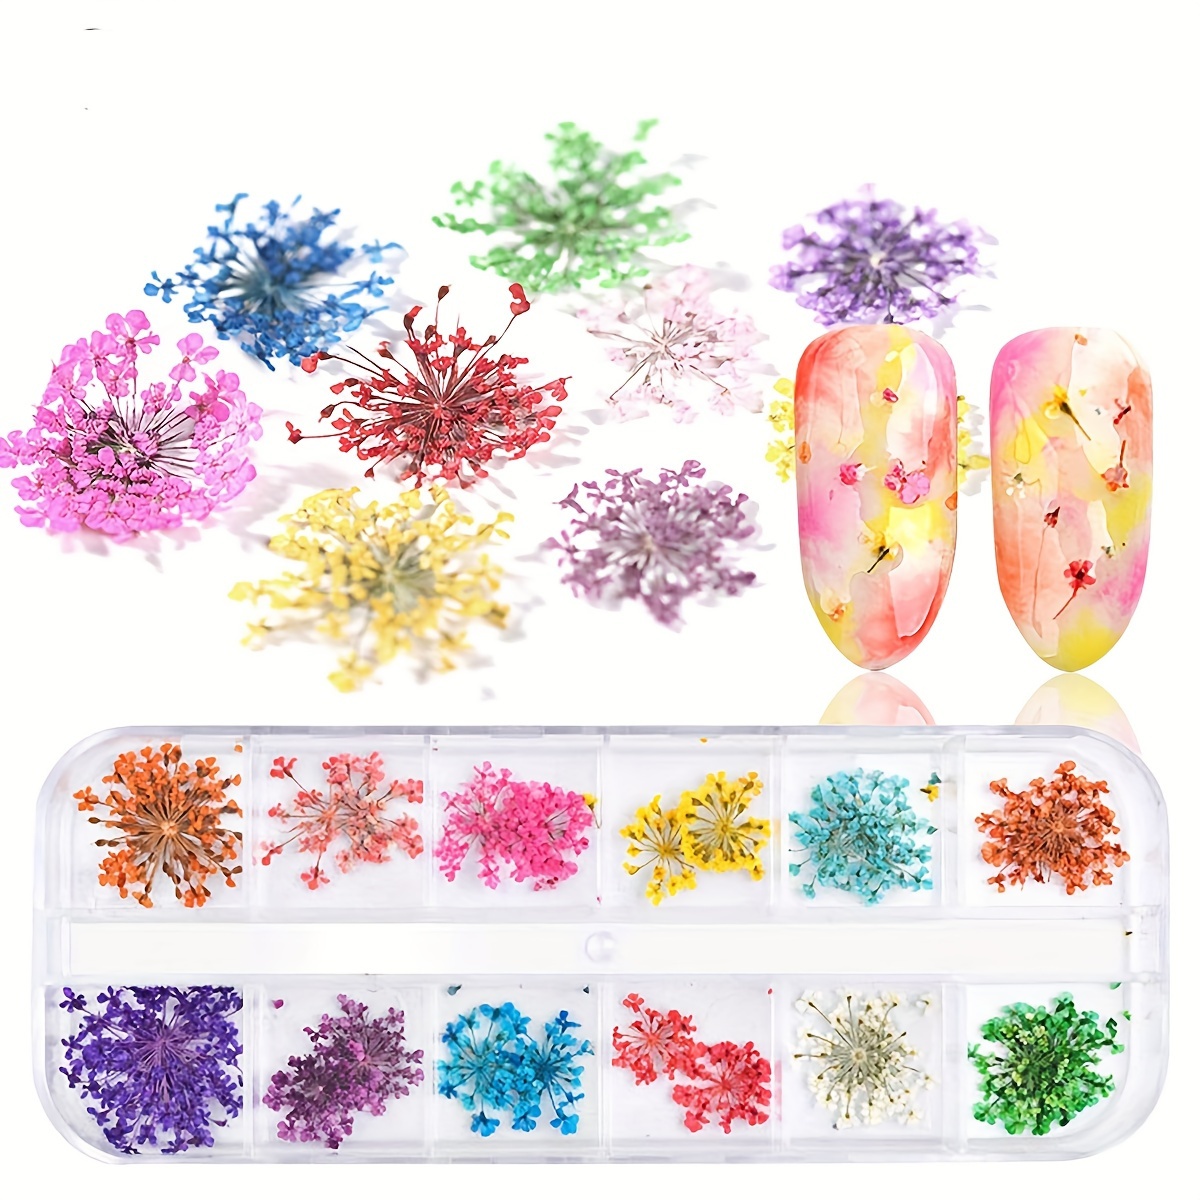 

24/36pcs 3d Dried Flower Nail Decoration Natural Floral Sticker Mixed Dry Flower Colorful Decals Jewelry Uv Gel Polish Manicure